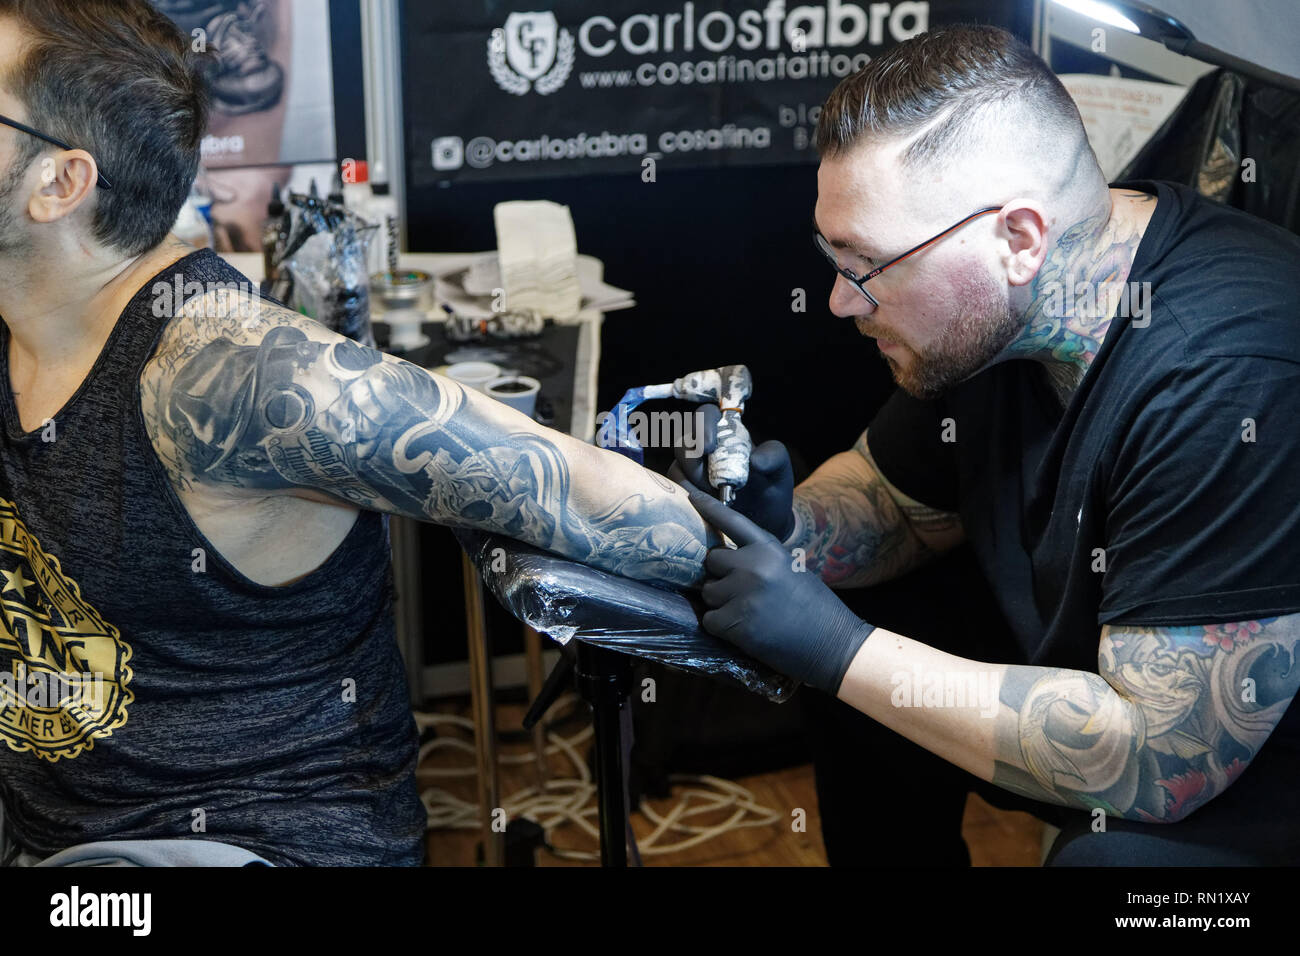 Paris France 15th Feb 19 Tattoo Artist Carlos Fabra During The 9th Edition Of The Mondial Du Tatouage World Tattoo On February 15 19 At The Grande Halle De La Villette In